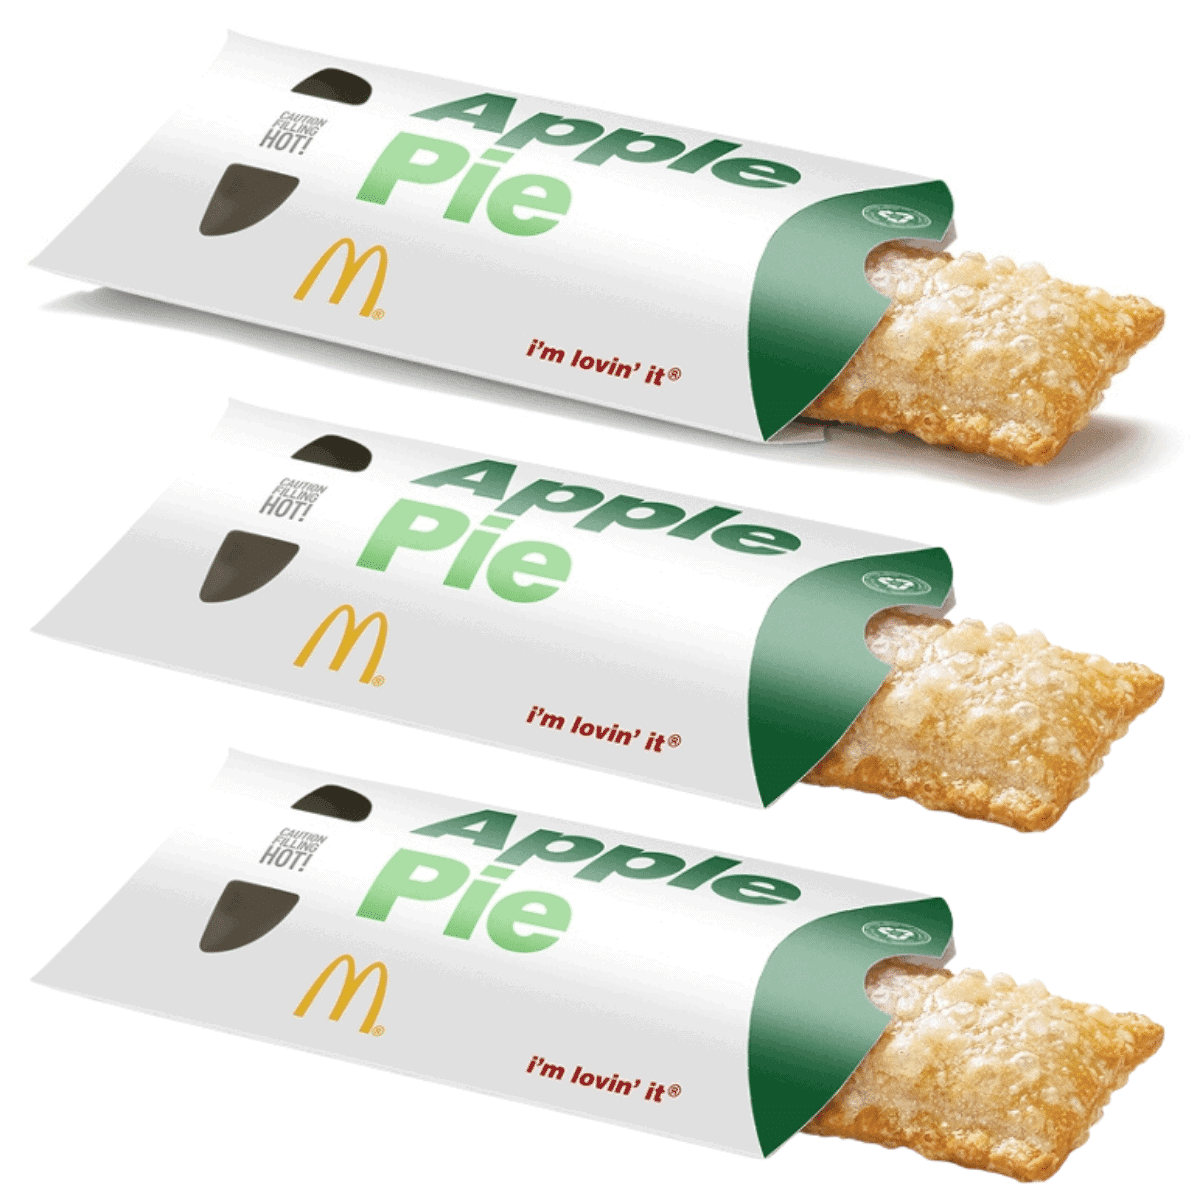 High Quality McDonald's Pies are Hot Blank Meme Template